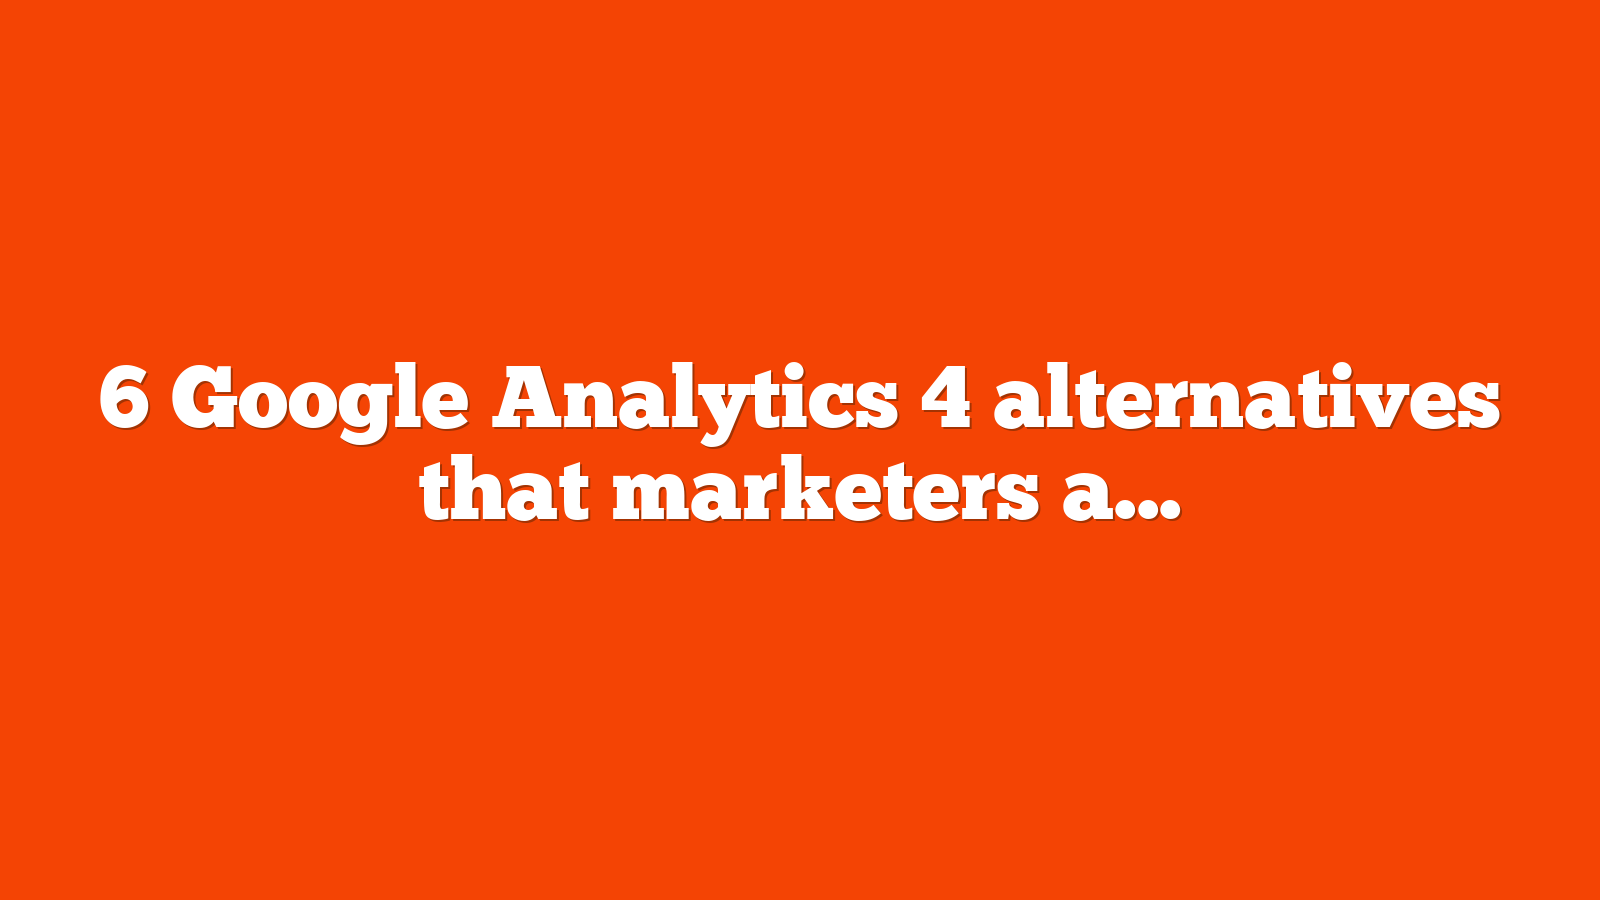 6 Google Analytics 4 alternatives that marketers are switching to